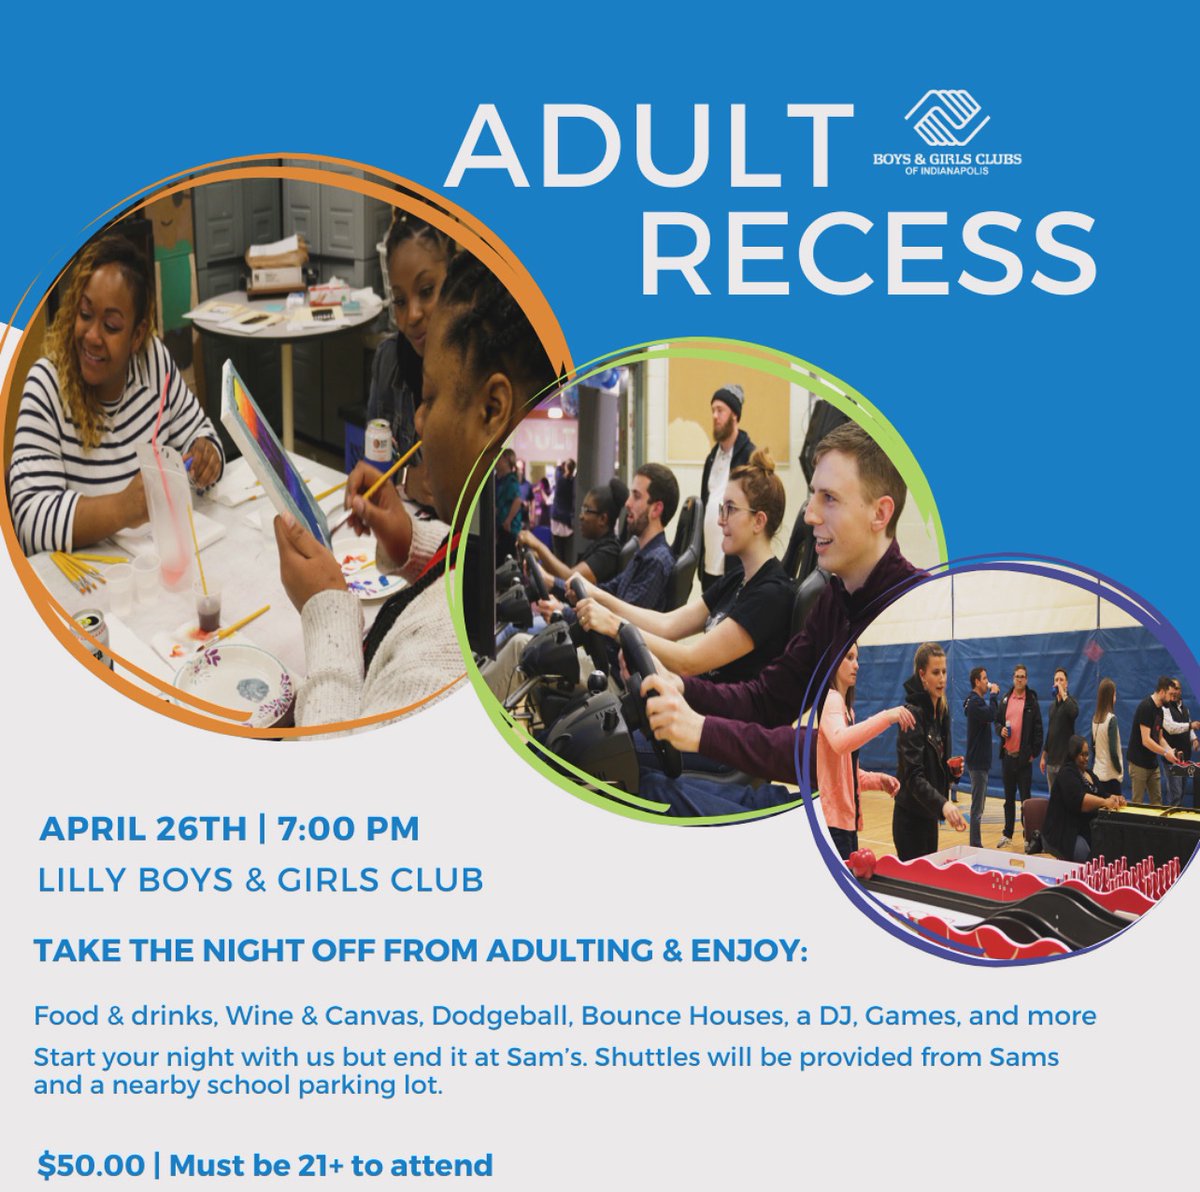 Get your tickets to relive your youth at our Adult Recess Event. Every ticket purchased goes toward covering the cost of a child’s summer membership. Join us today: eventbrite.com/e/adult-recess…